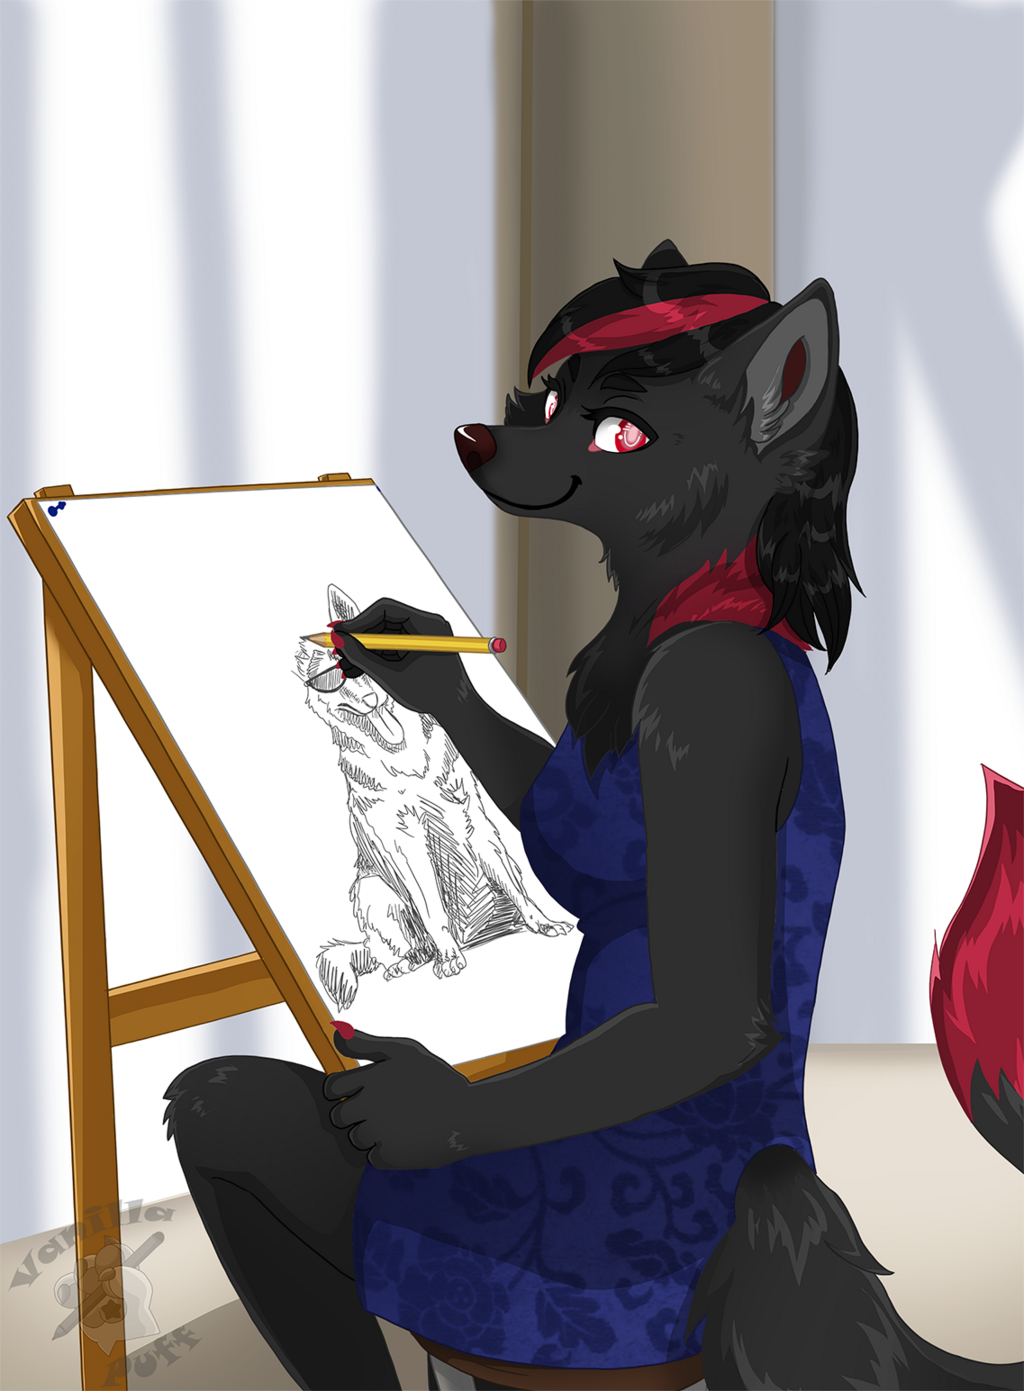 Drawing the artist [Trade]